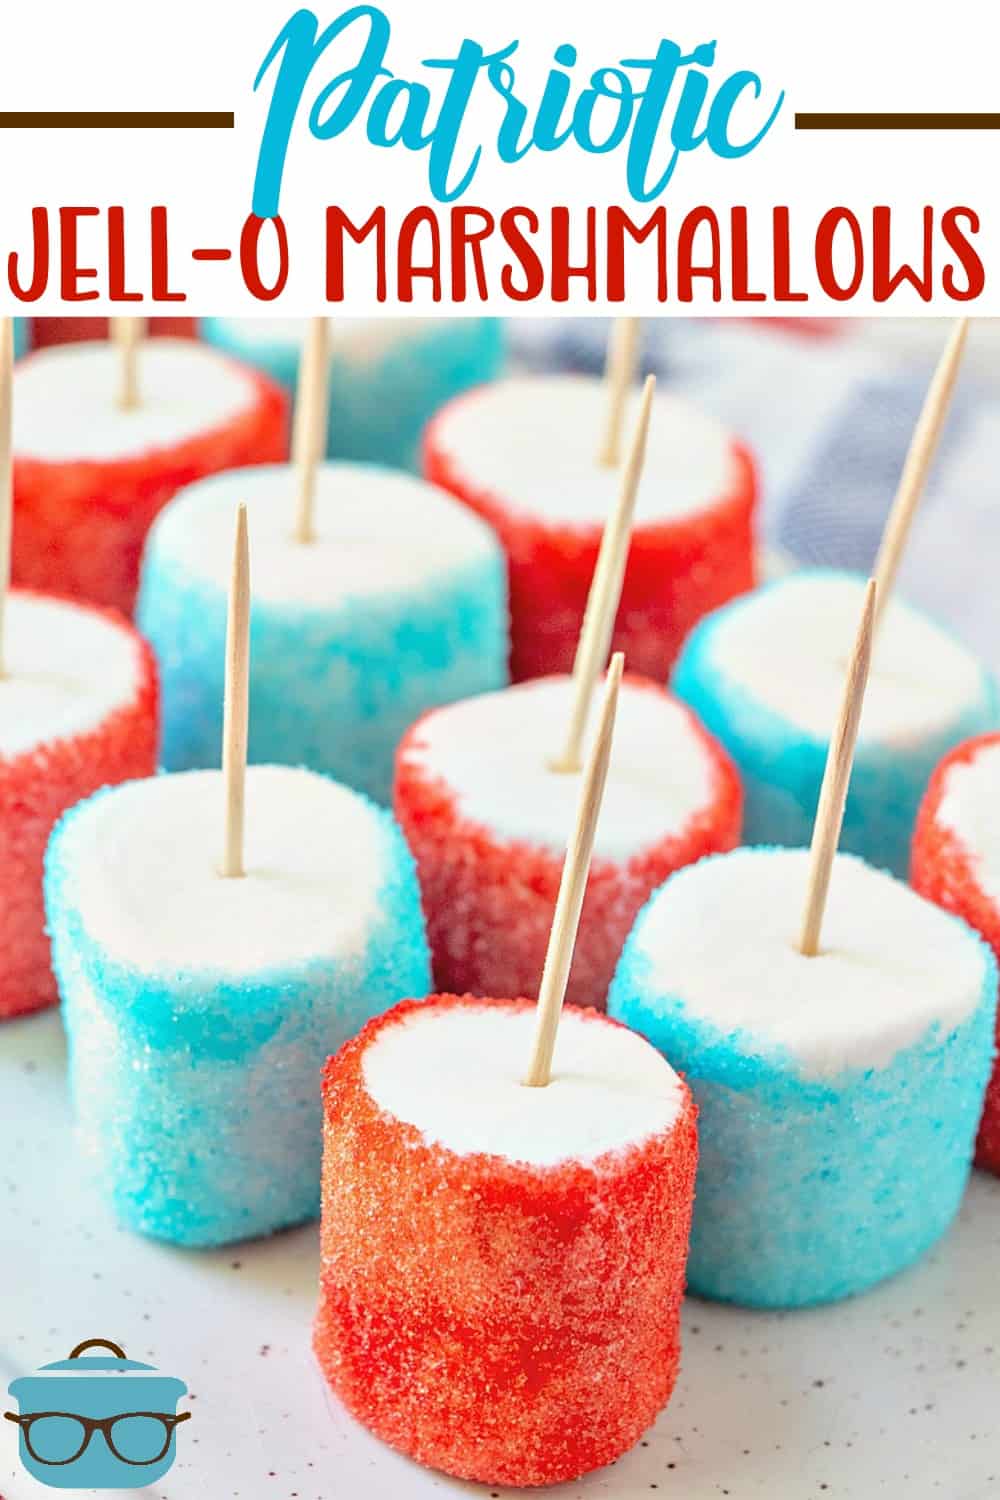 Patriotic Jell-o Marshmallows recipe from The Country Cook shown lined up on a white tray.